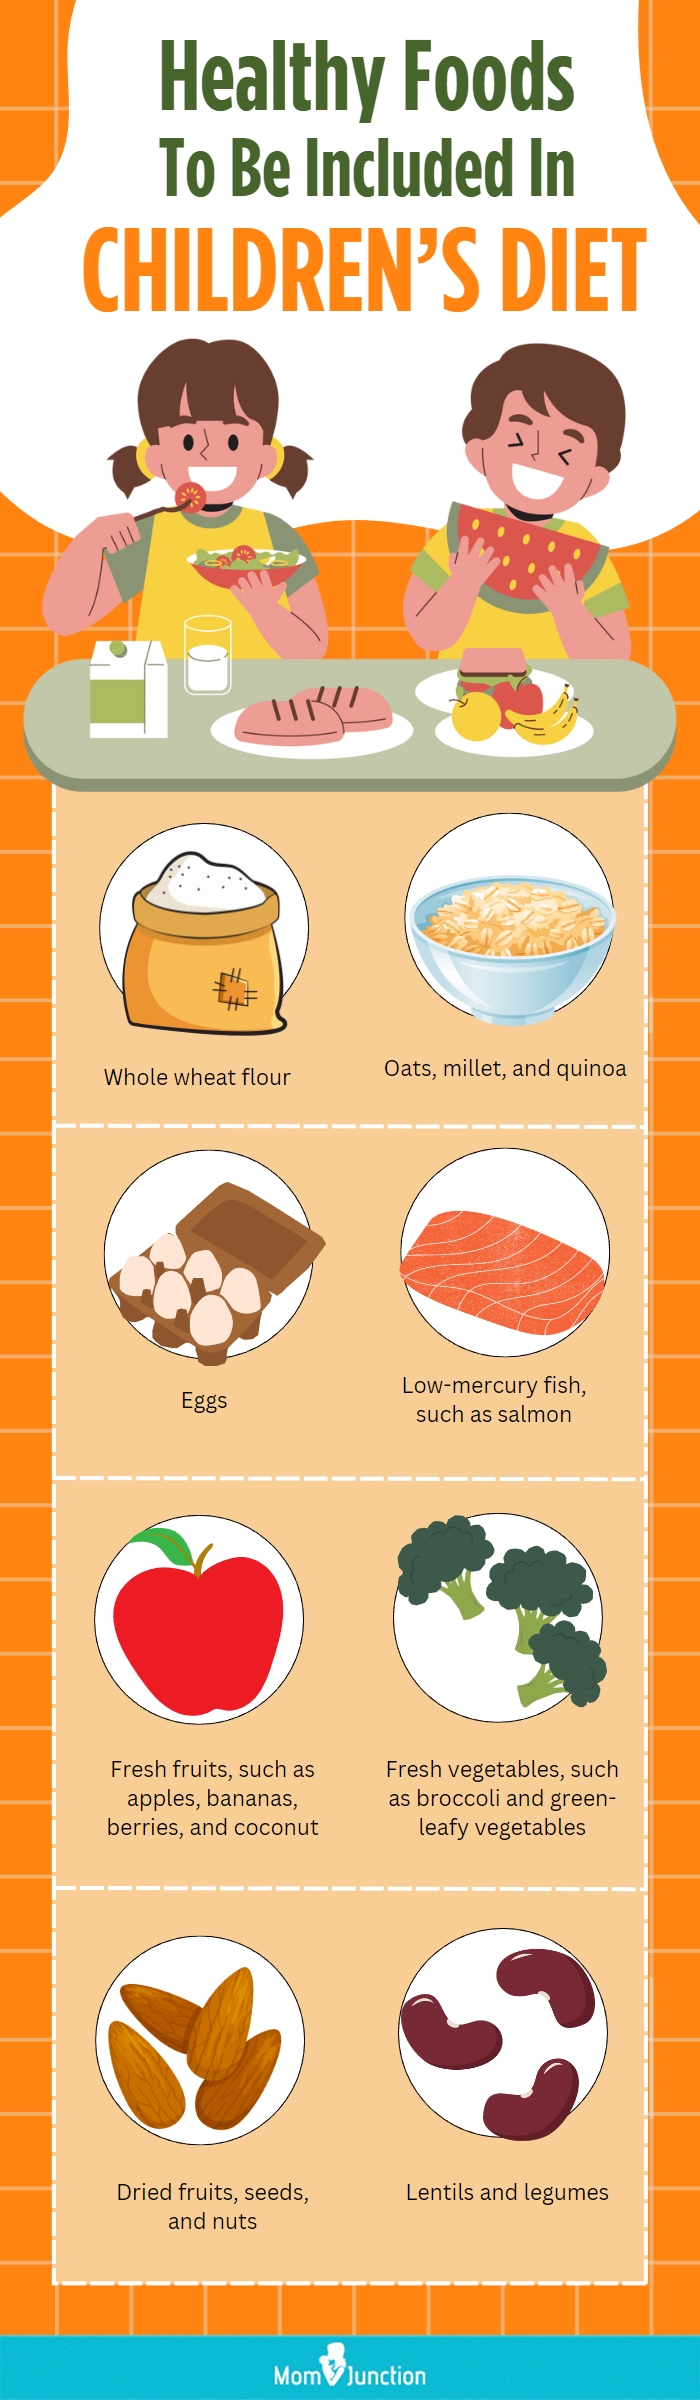 Top 21 Healthy Foods For Kids And Tips To Make Them Eat